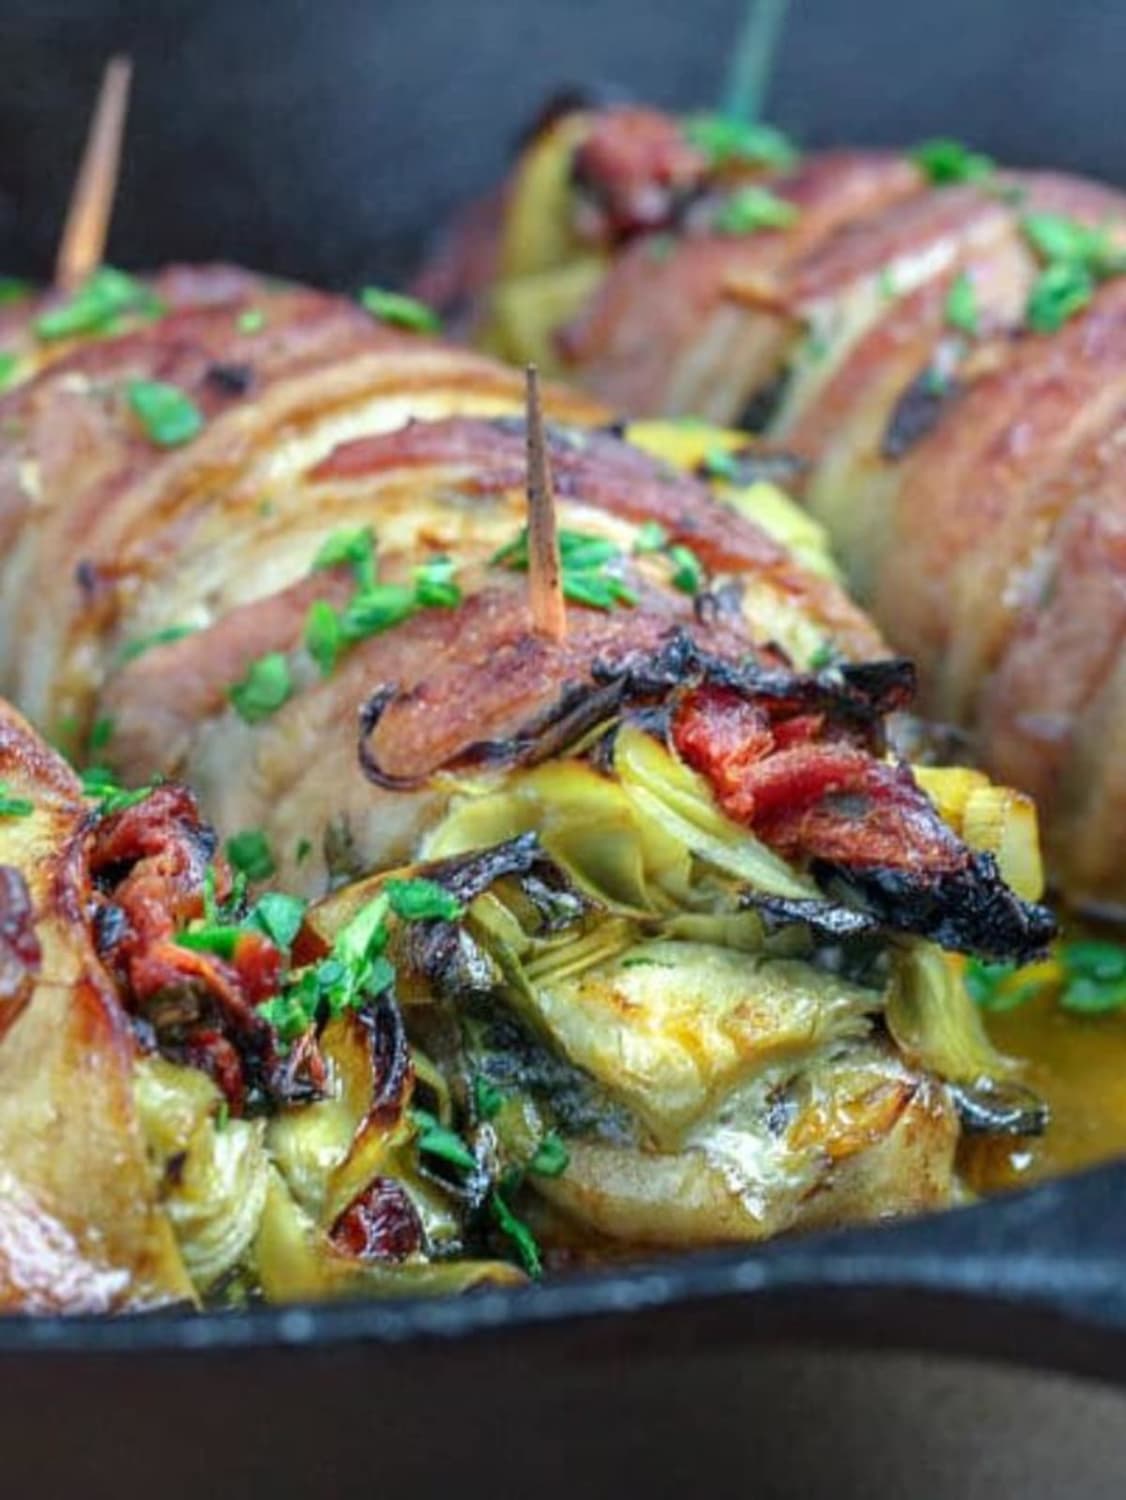 Bacon Wrapped Stuffed Chicken Breast